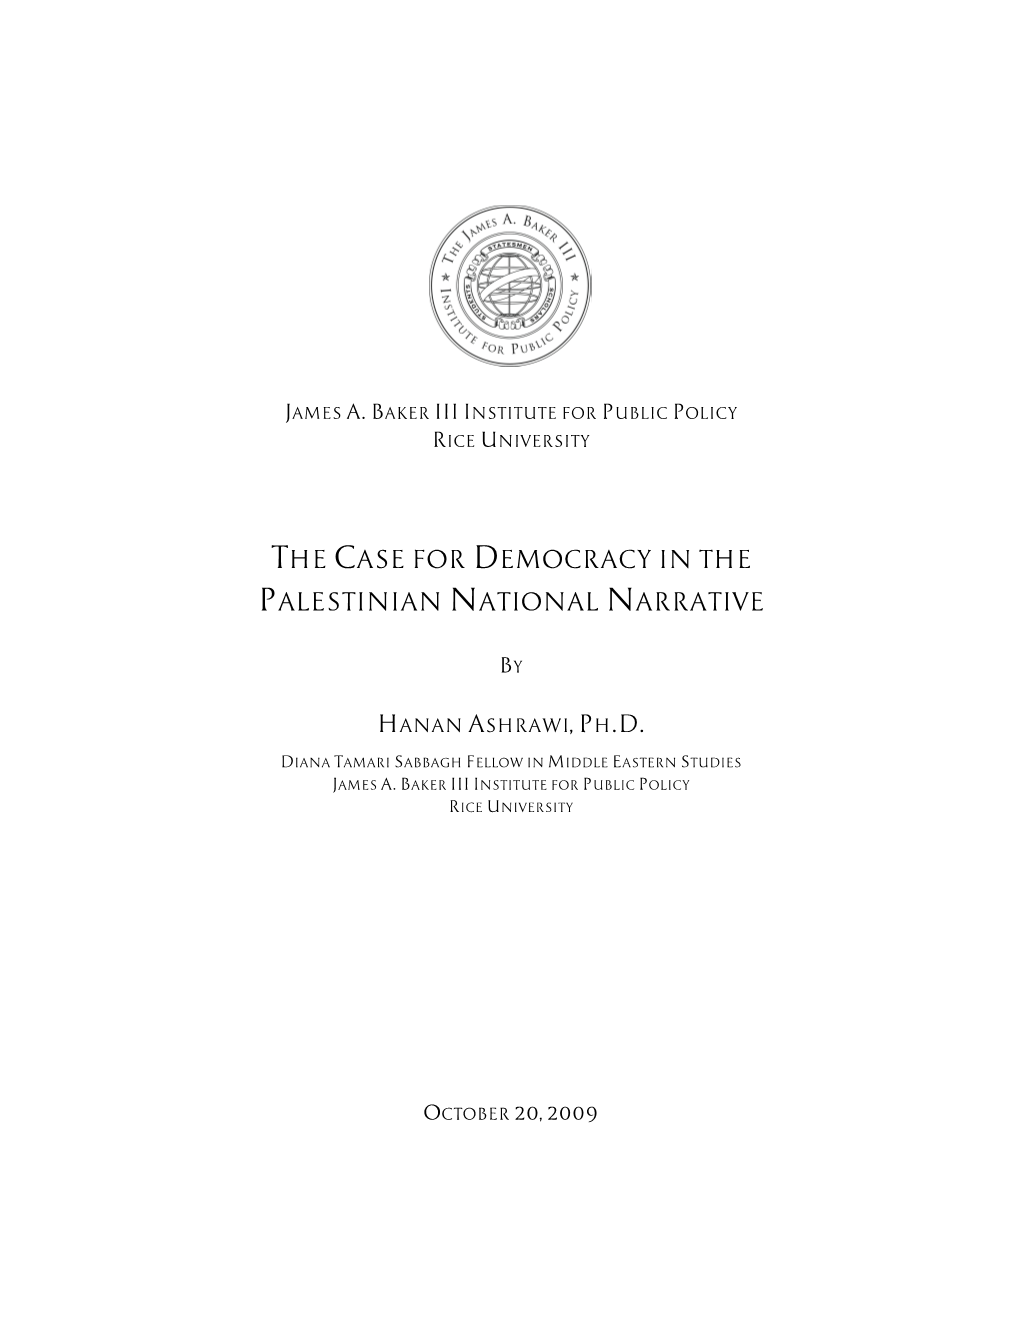 The Case for Democracy in the Palestinian National Narrative